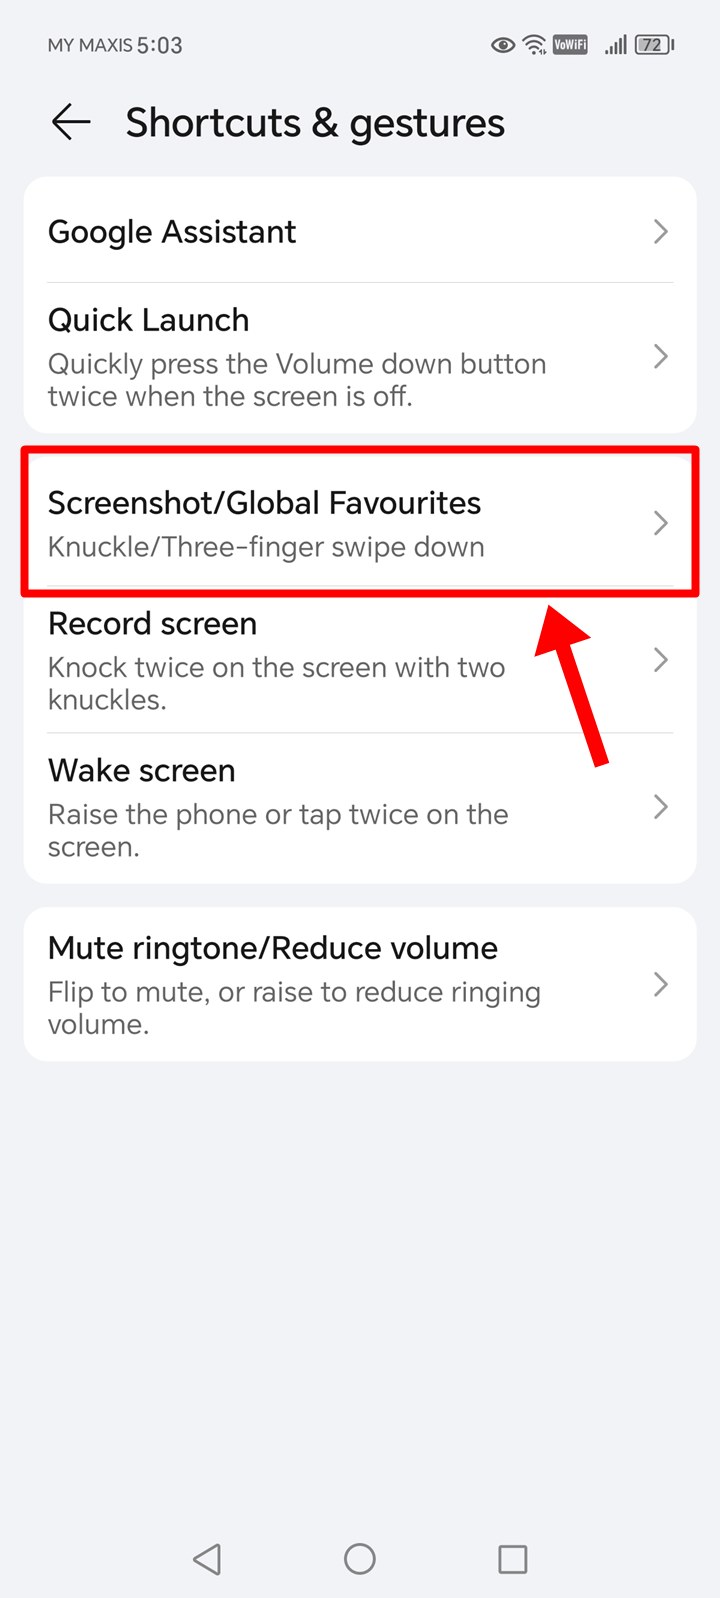 The "Screenshot/Global Favorites" option on an Honor phone has been highlighted.